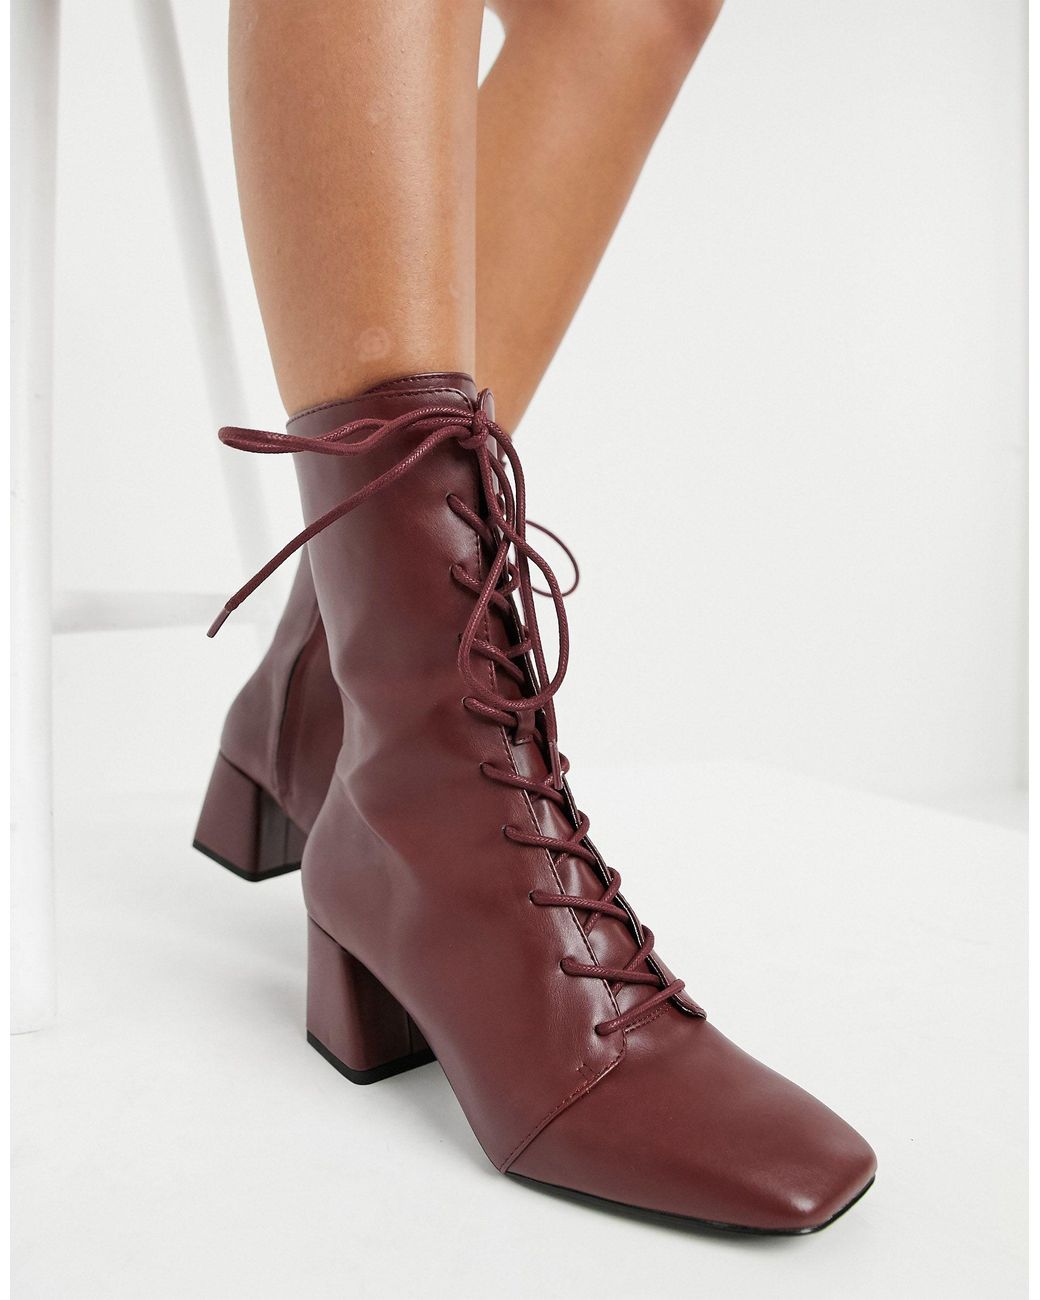 Monki Thelma Faux Leather Lace Up Heeled Boots in Red | Lyst Australia